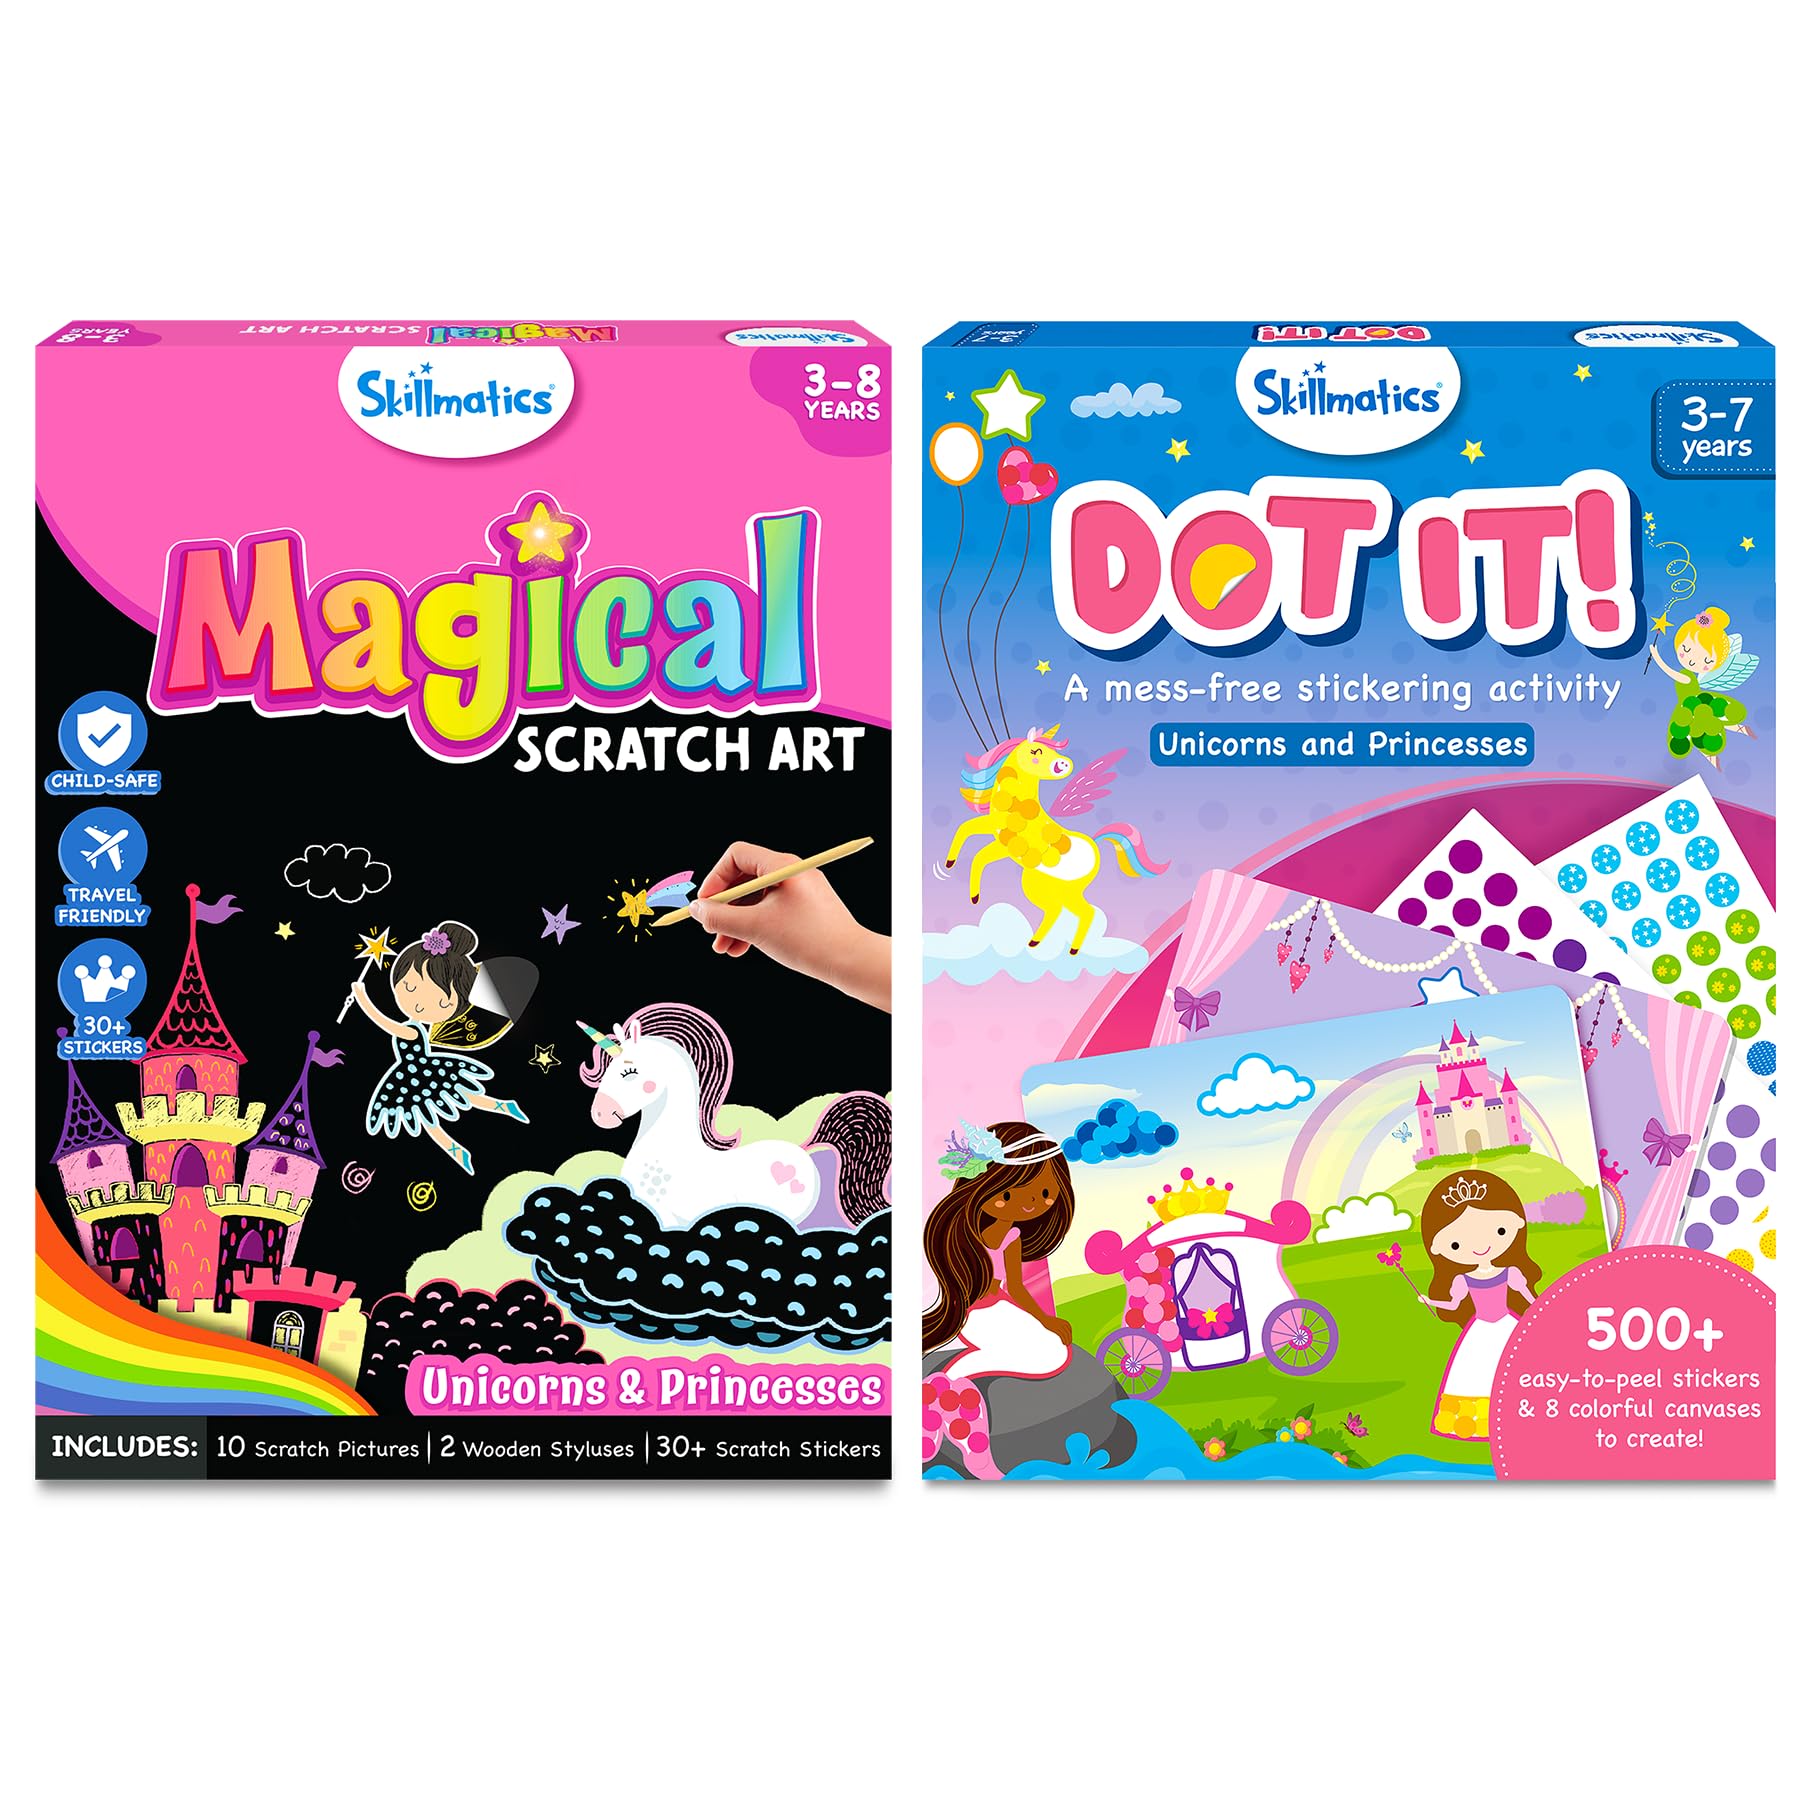 Skillmatics Dot It & Magical Scratch Art Book Unicorns & Princesses Theme Bundle, Art & Craft Kits, DIY Activities for Kids, Gifts for Ages 3 and Up